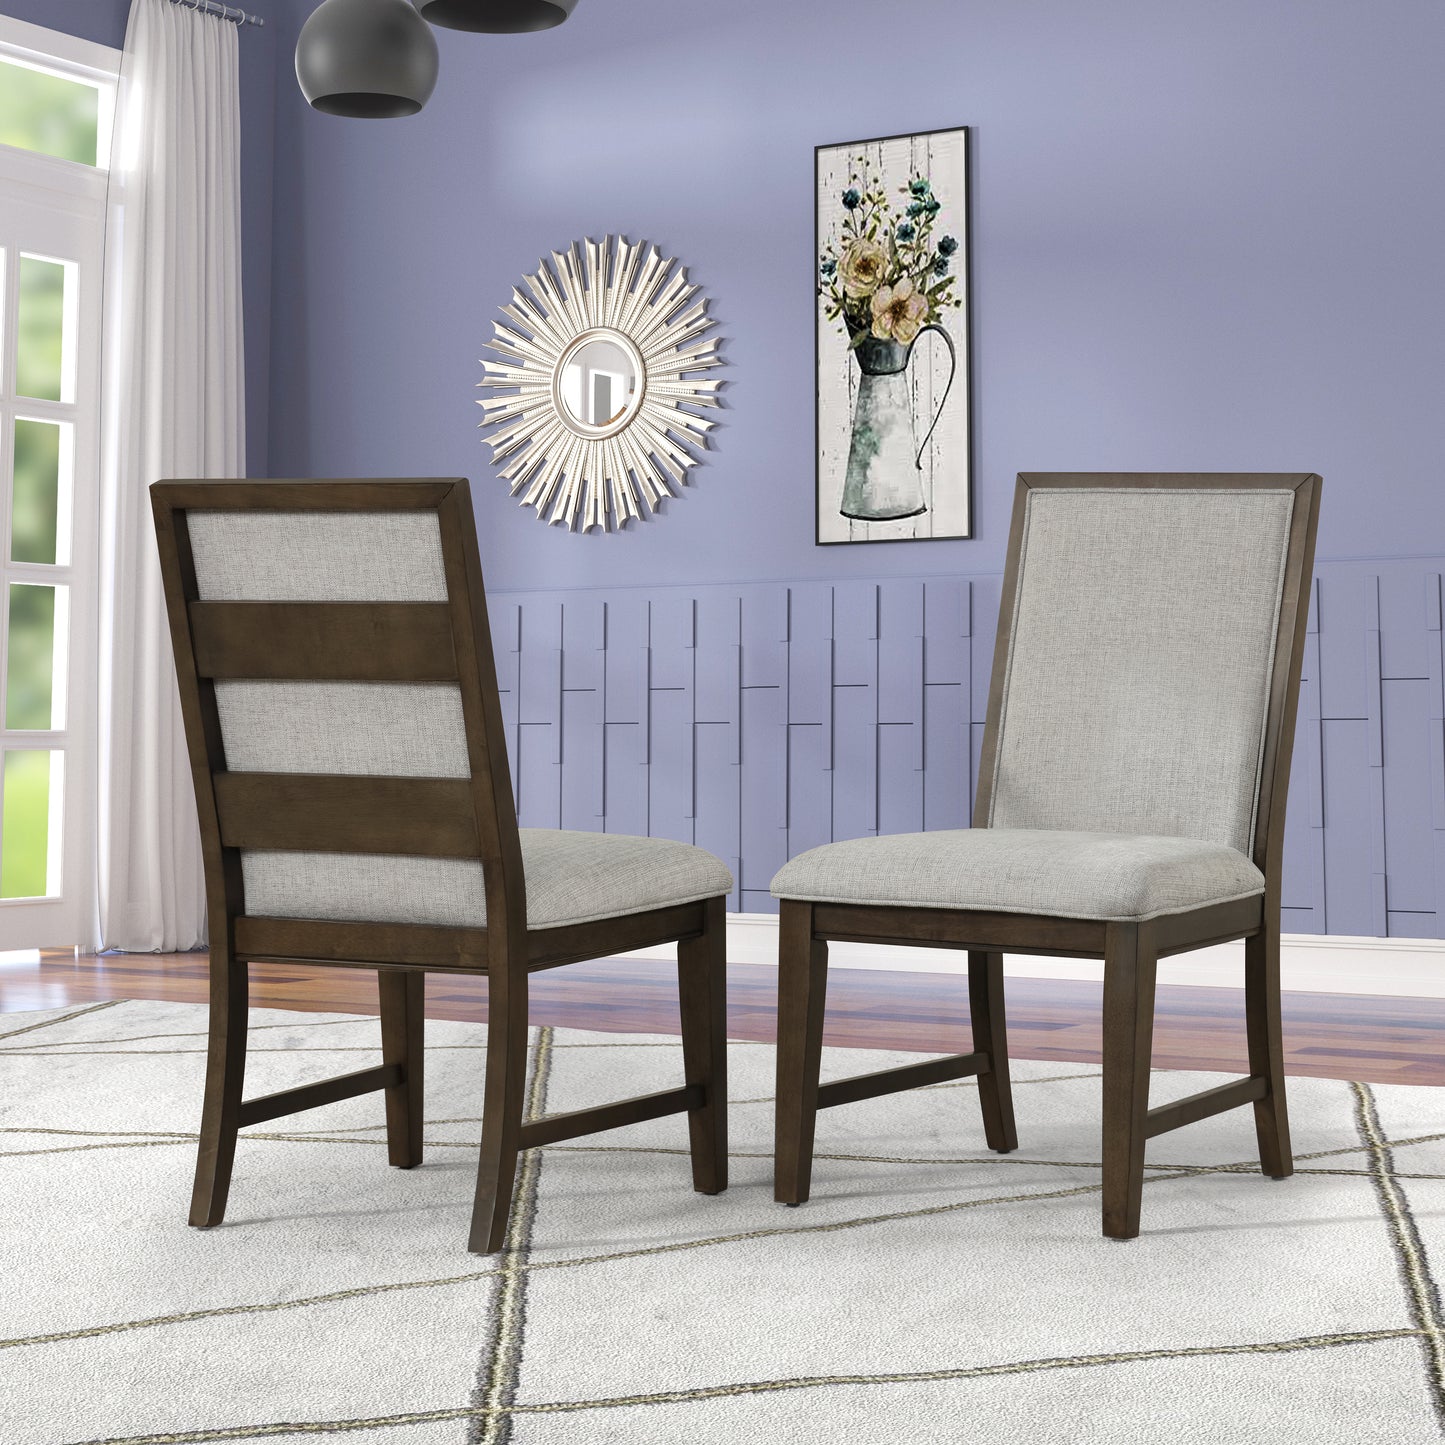 Roundhill Furniture Aberll Wood Dining Room Set, Table with 4 Side Chairs and 2 Armchairs, Gray